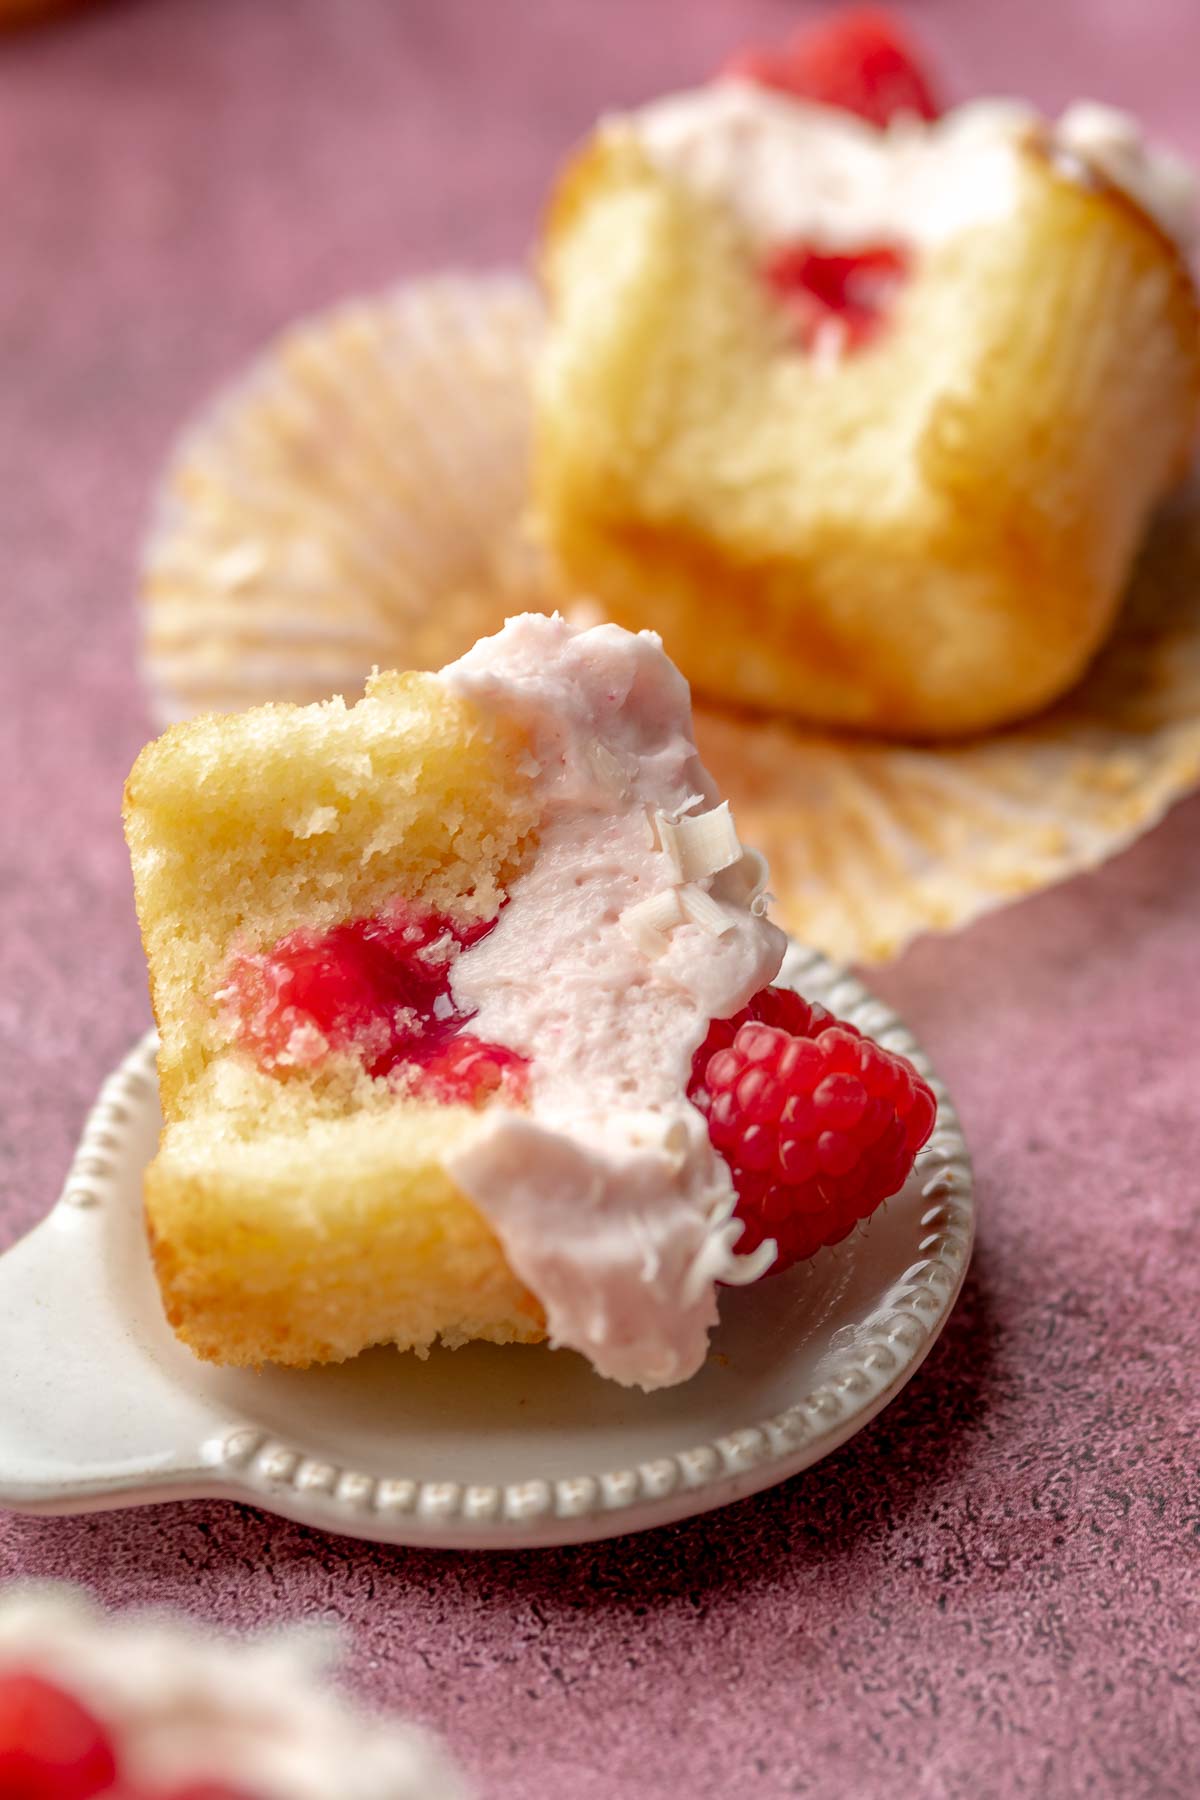 Raspberry cupcake laying on the side with a bite removed.